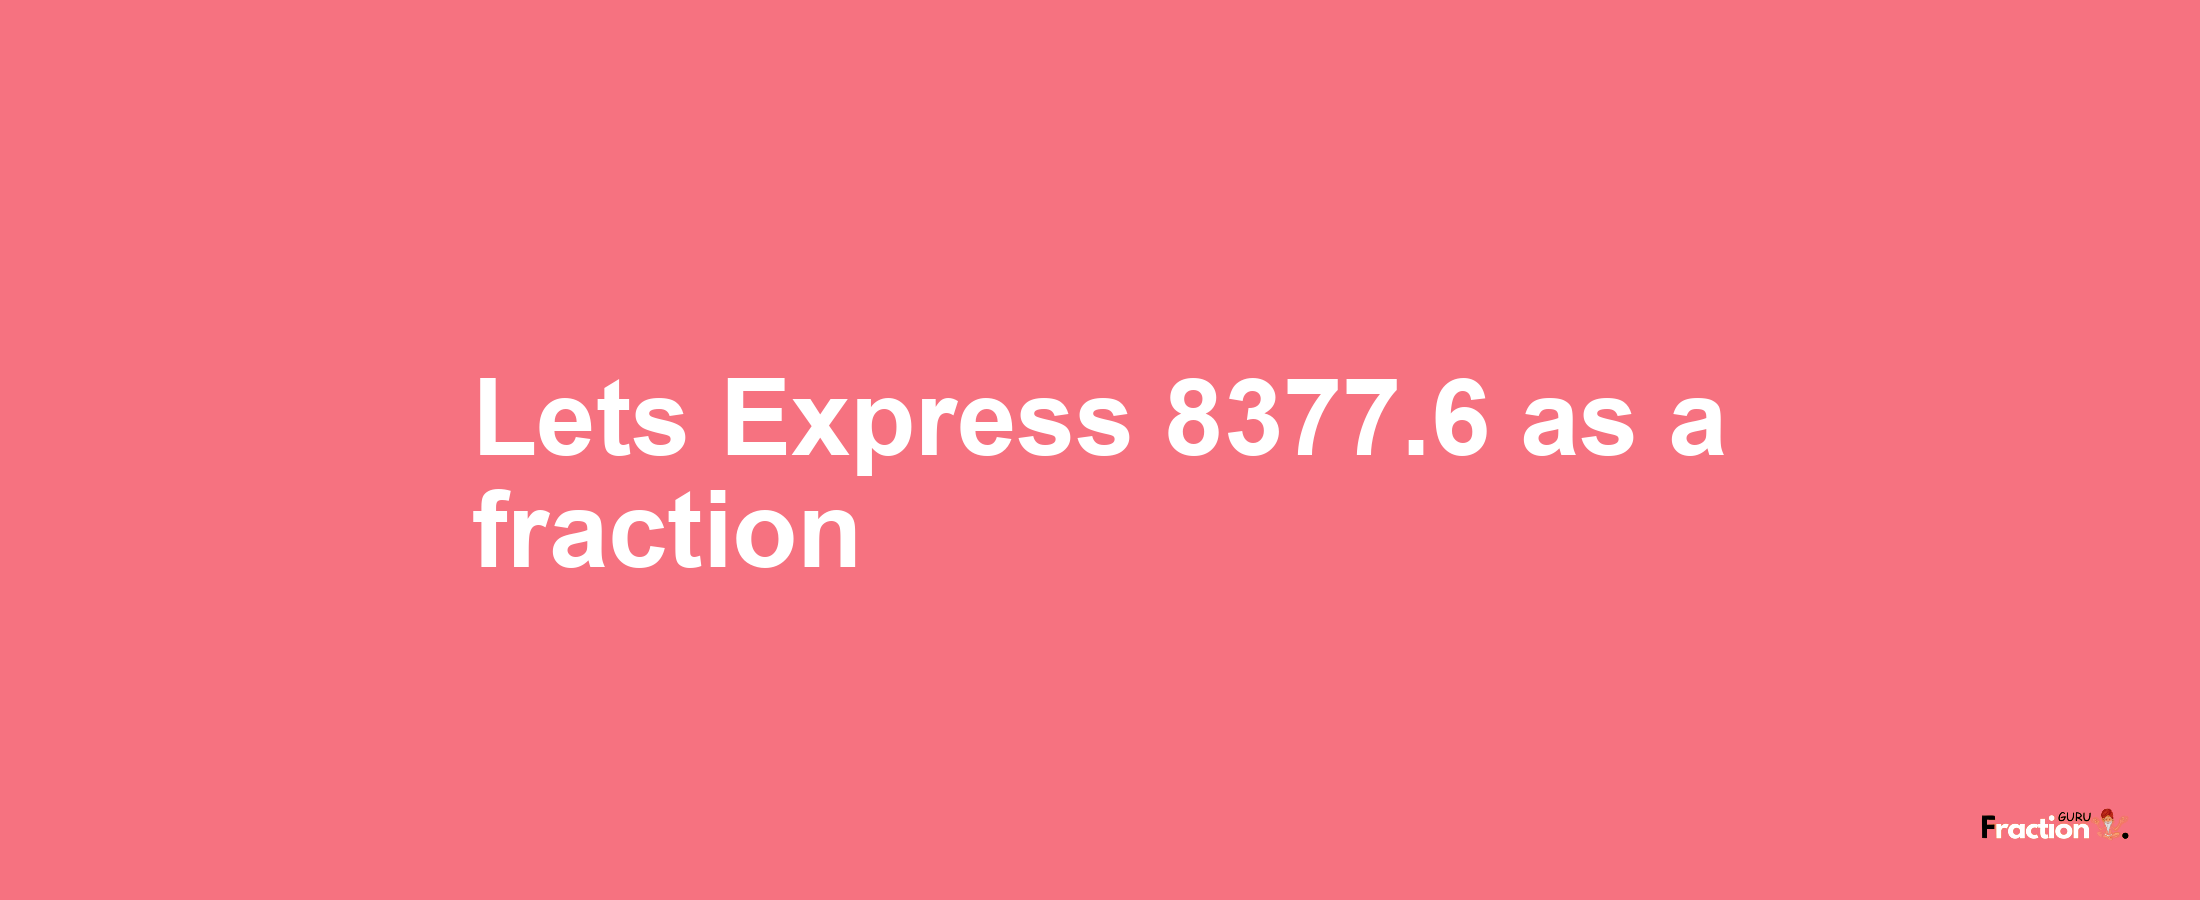 Lets Express 8377.6 as afraction